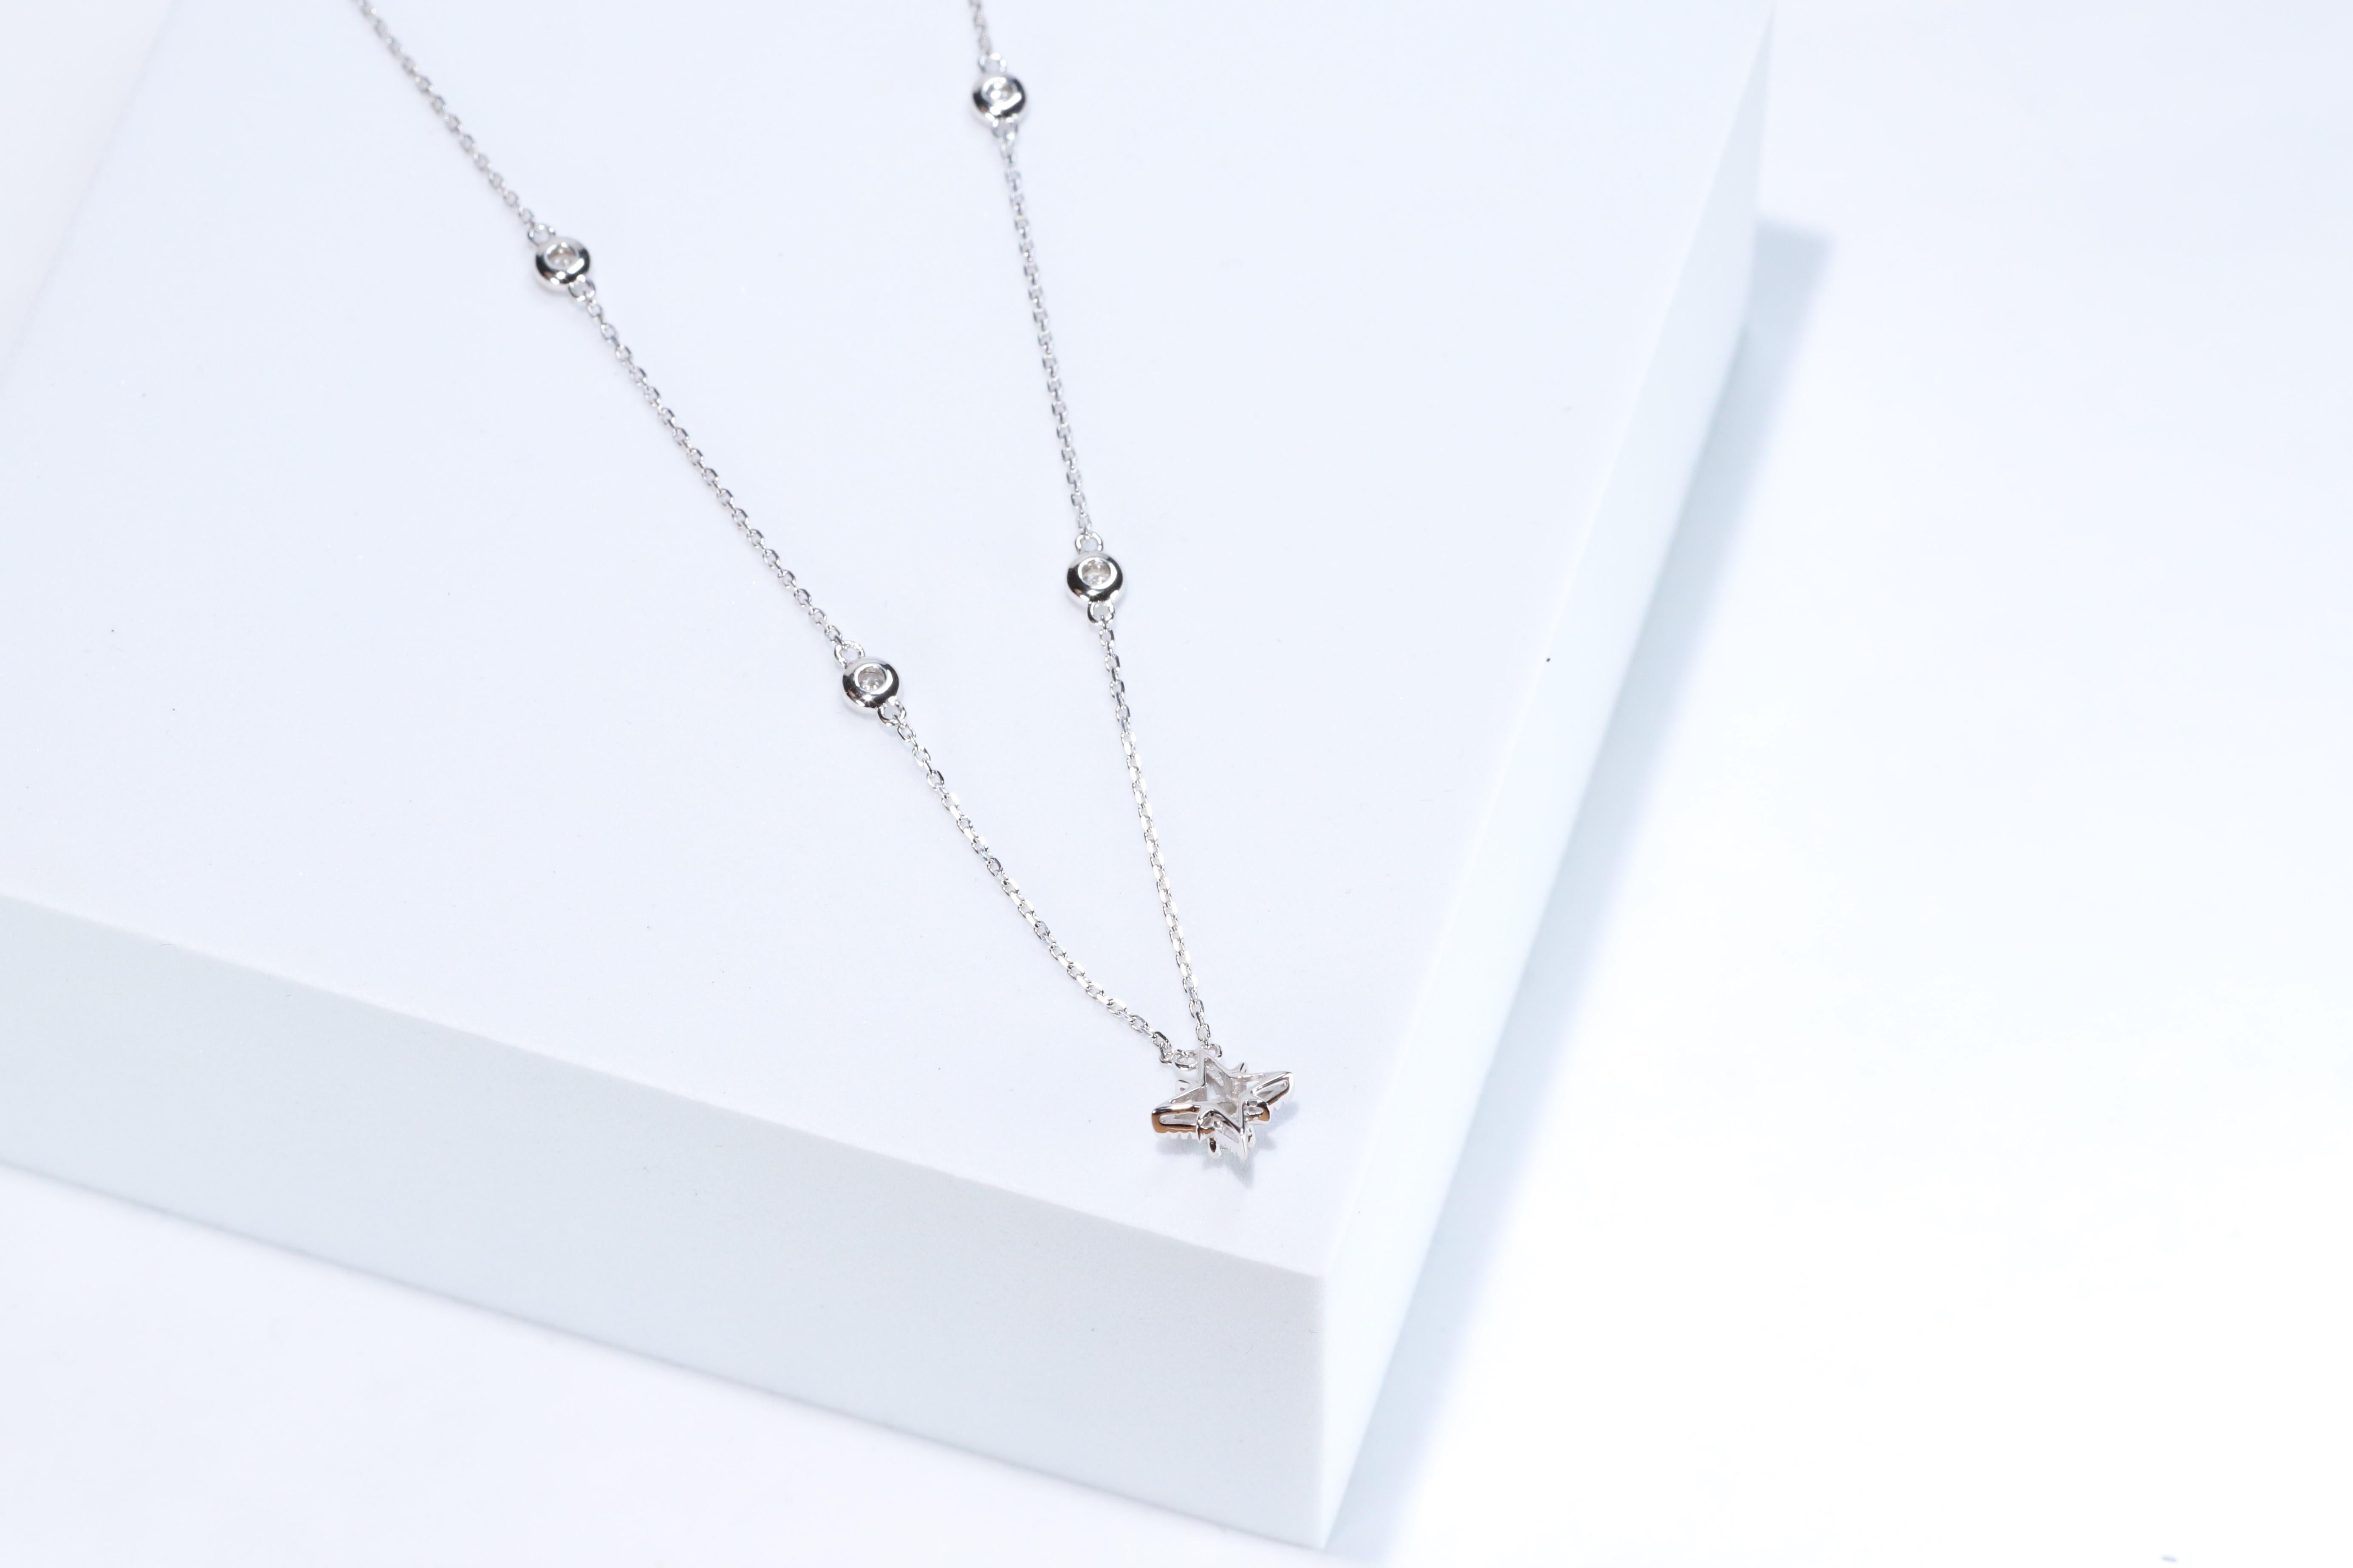 Stunning, timeless and classy eternity Unique Necklace. Decorate yourself in luxury with this Gin & Grace Necklace. The 14K White Gold jewelry boasts with Natural Round-cut white Diamond (5 Pcs) 0.33 Carat accent stones for a lovely design. This